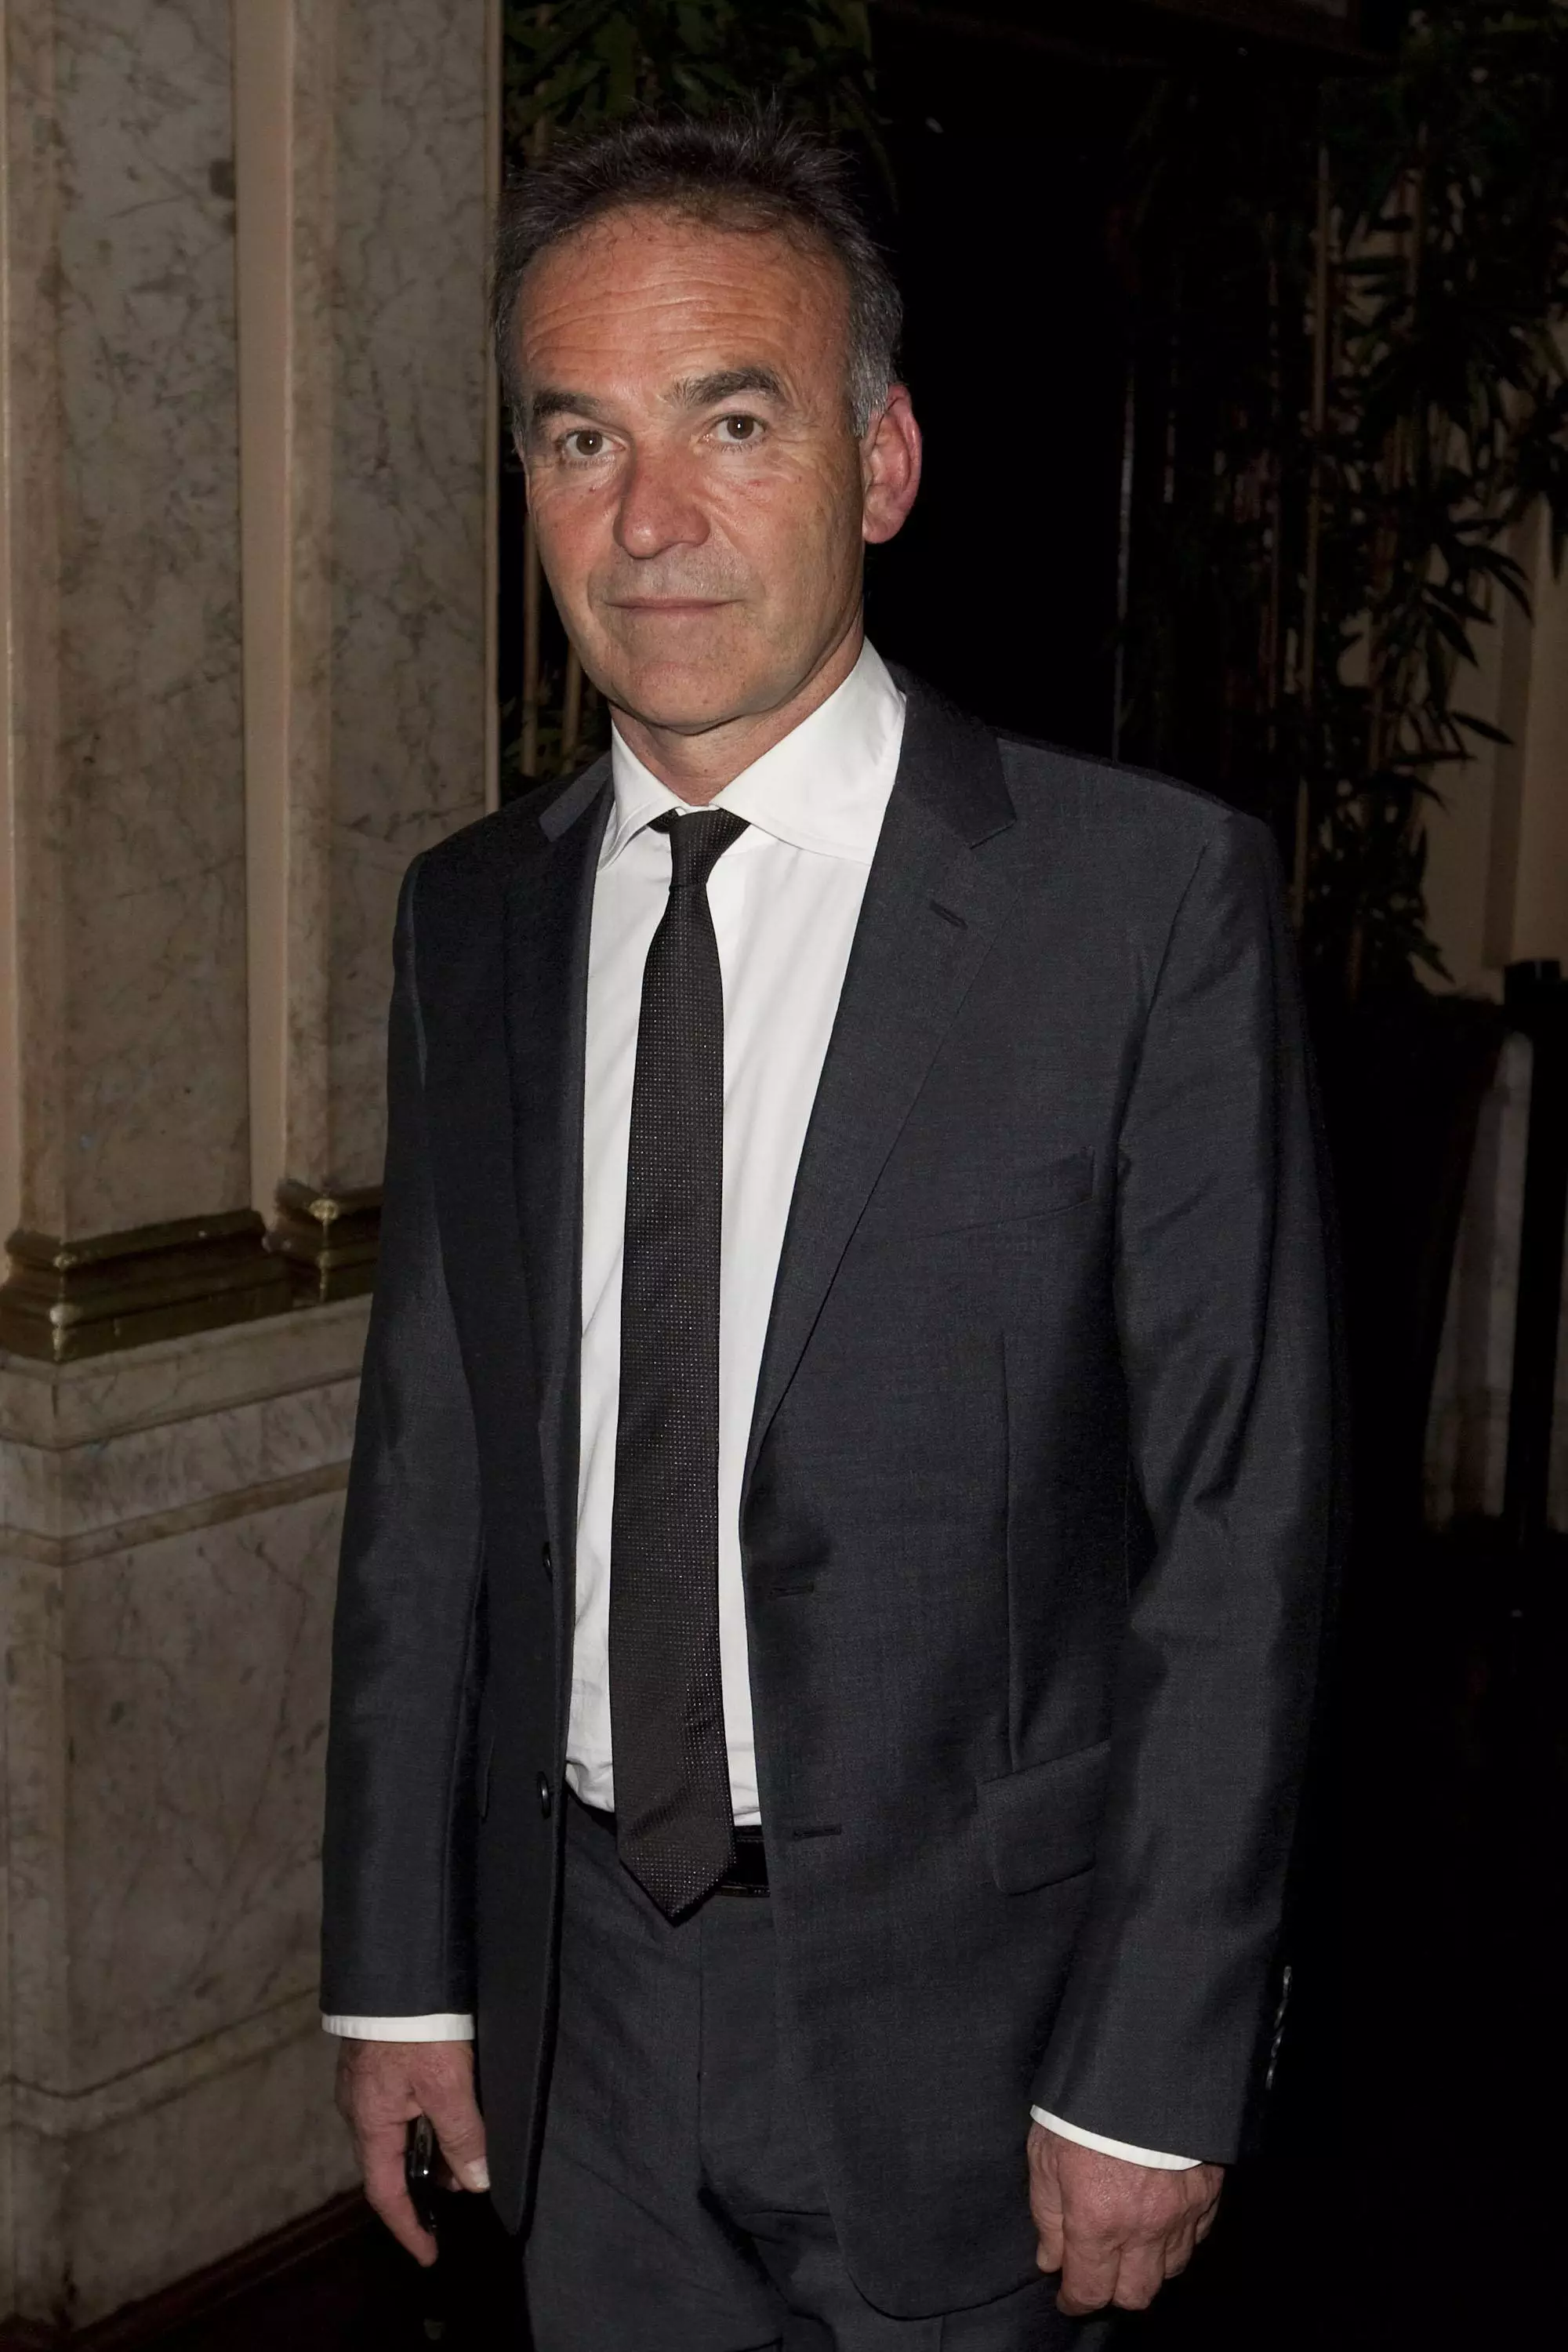 Nick Broomfield believes he's found new evidence into the deaths of Tupac and Biggie Smalls.